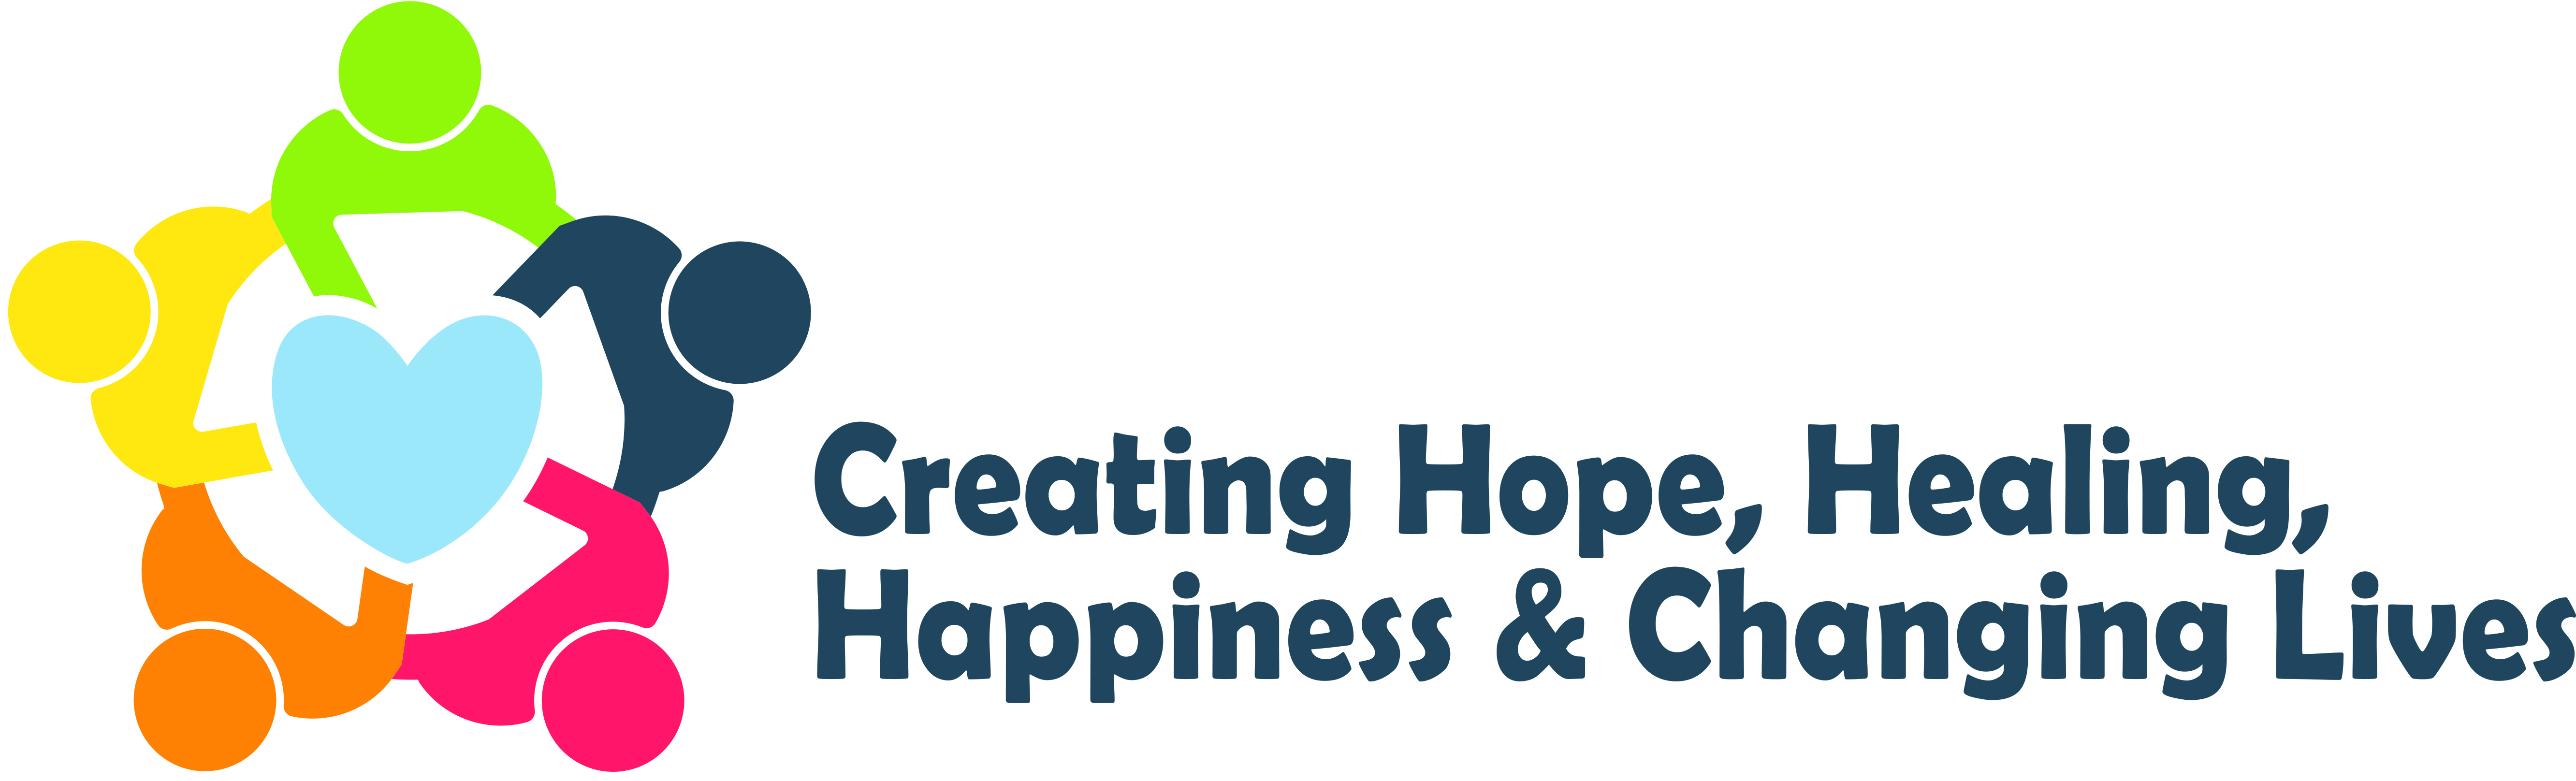 Creating Hope, Healing, Happiness and Changing Lives